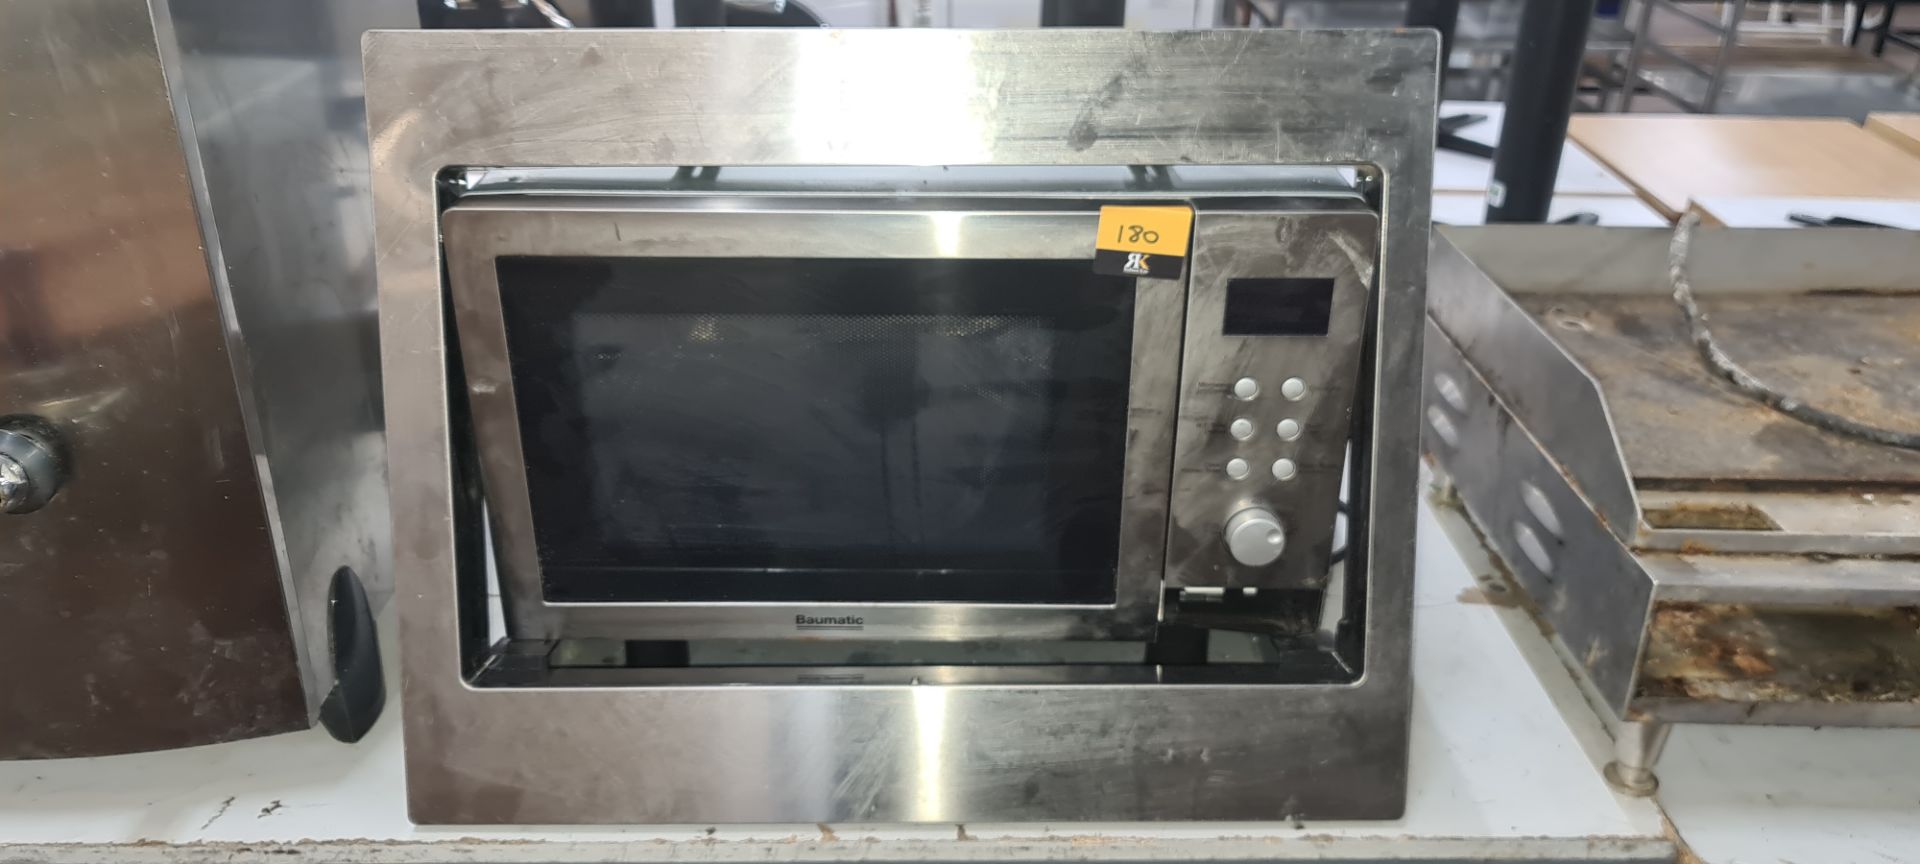 Baumatic microwave with detachable surround for integrating into cupboards NB. Damaged "Open" button